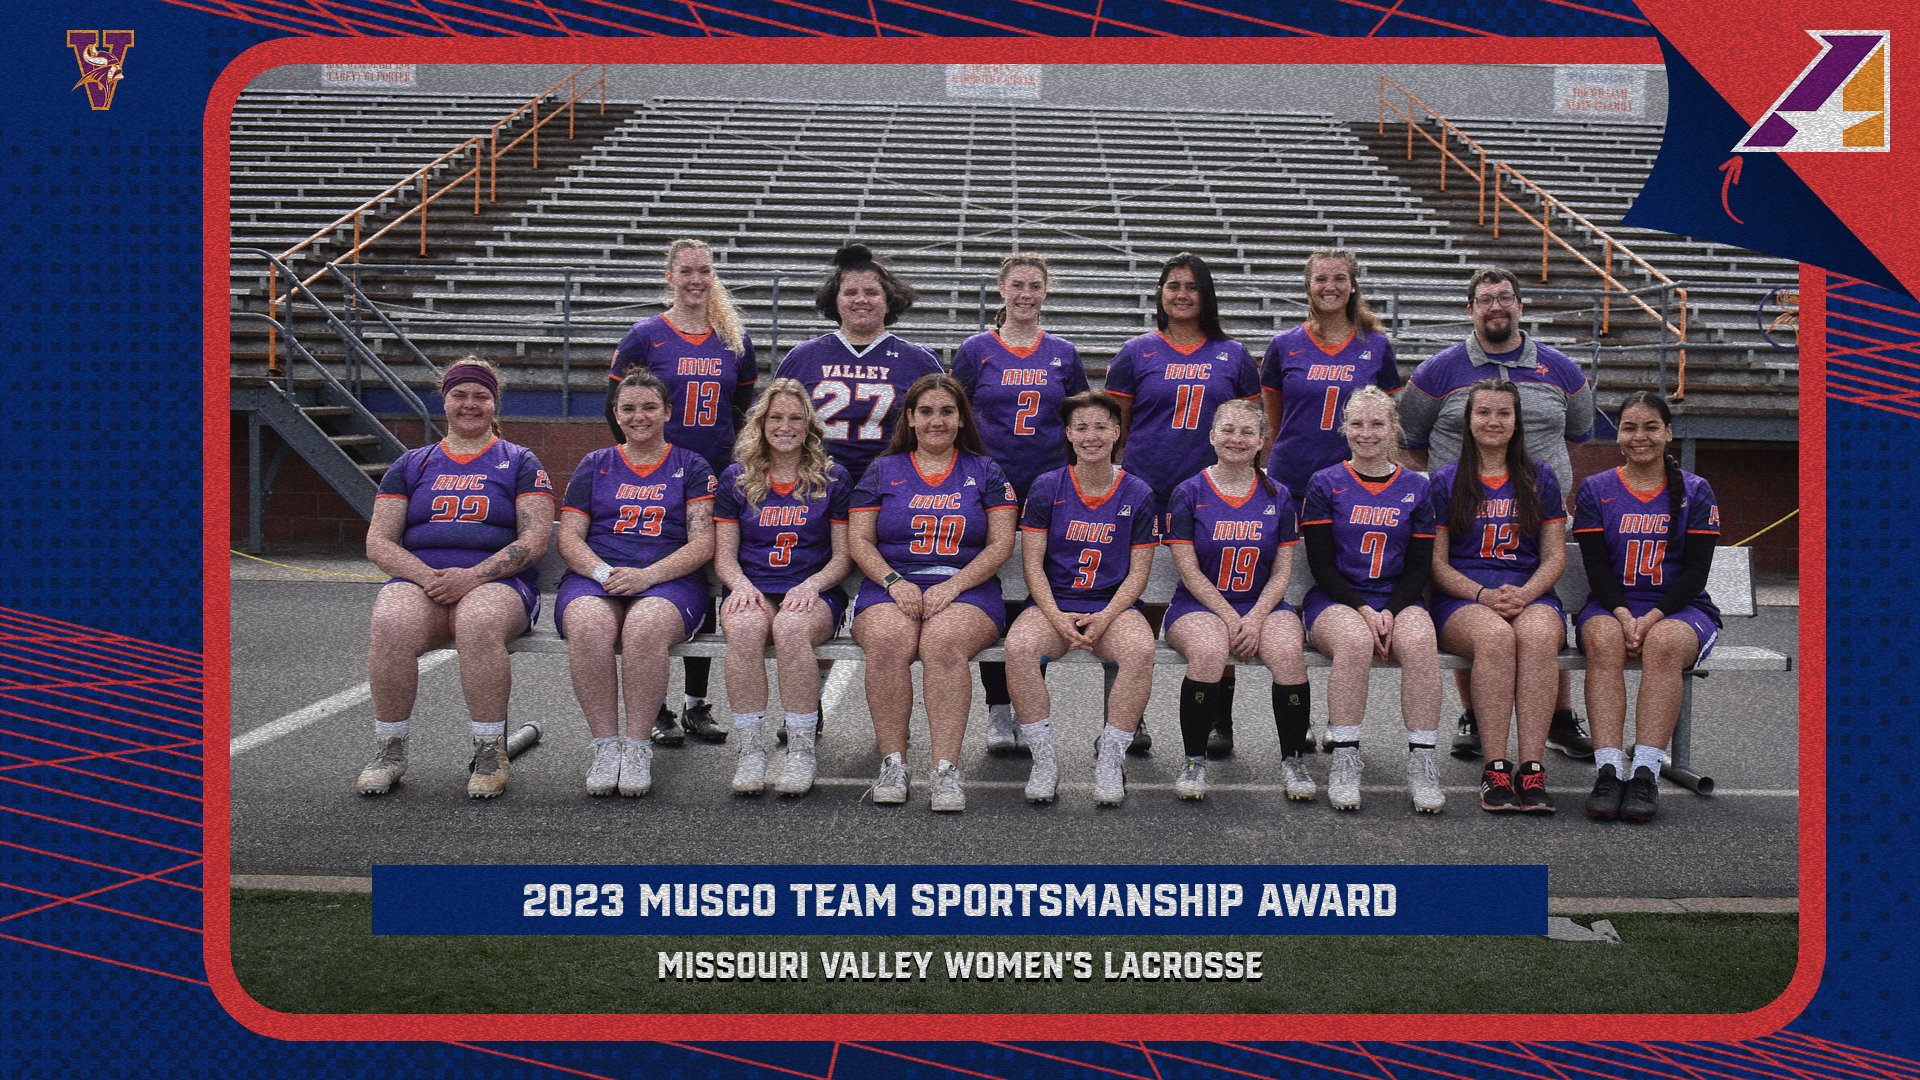 Missouri Valley Women&rsquo;s Lacrosse Selected for First-Ever 2023 Musco Team Sportsmanship Award